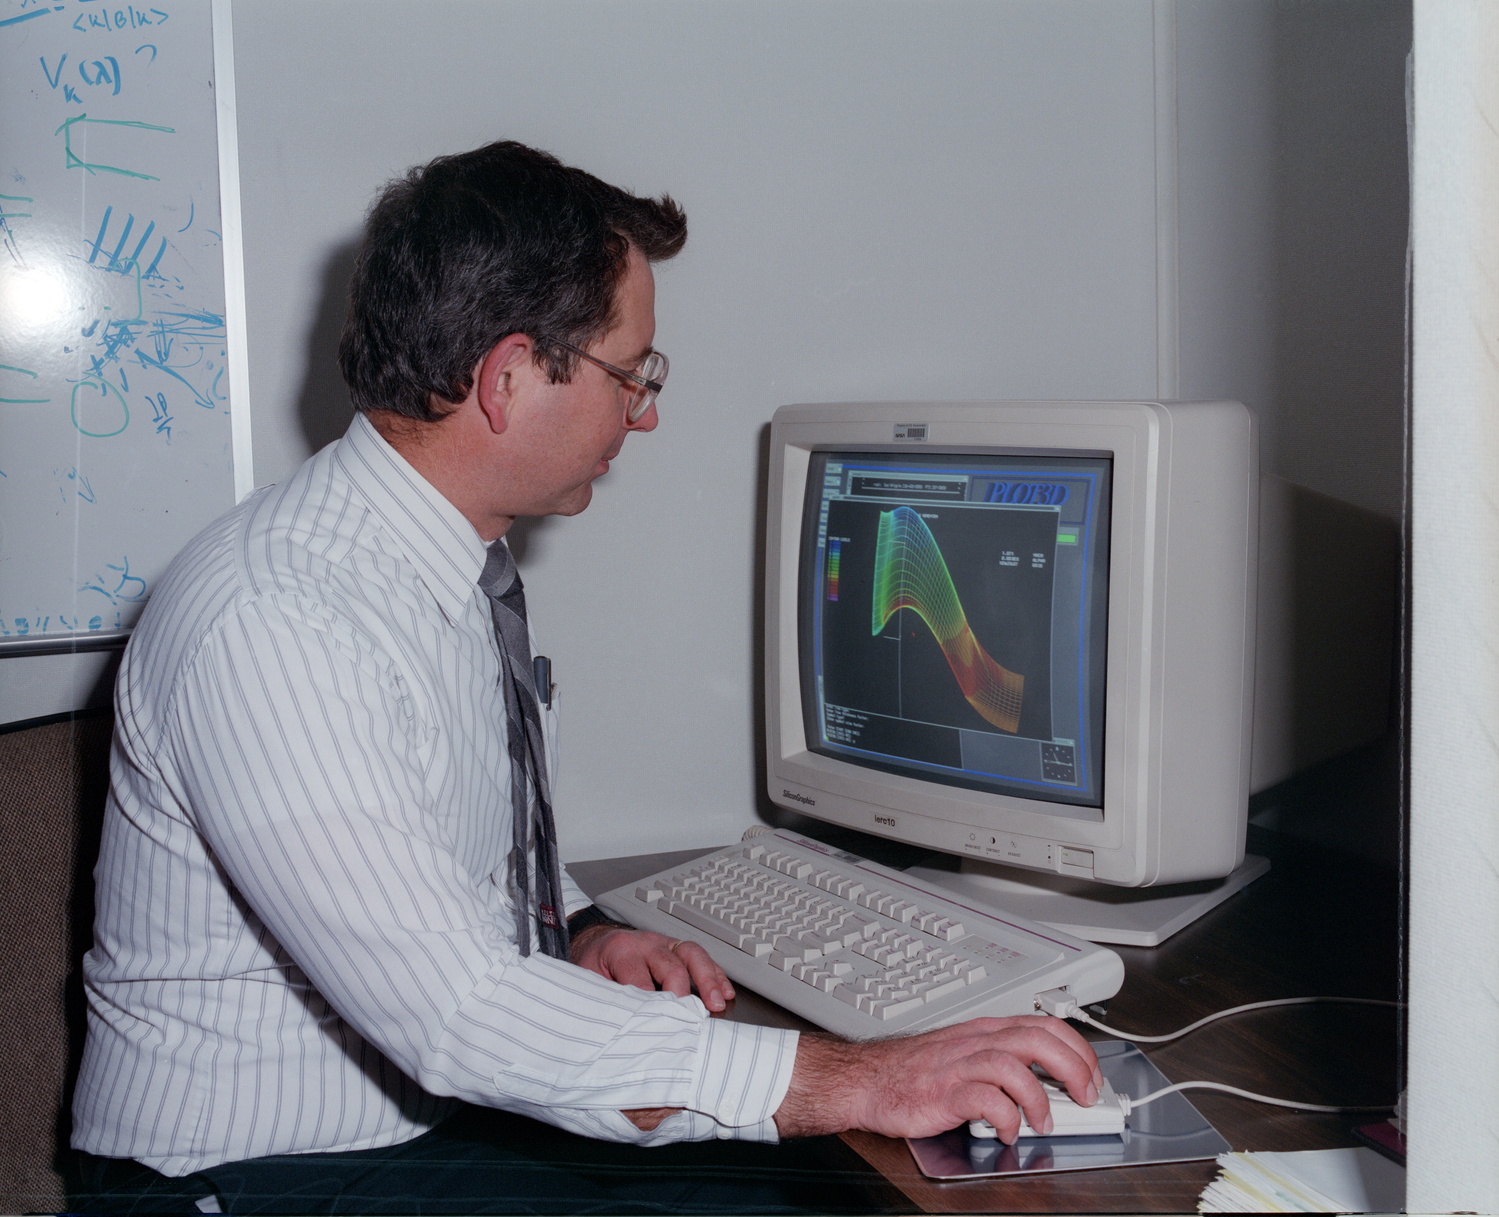 Older photo of a man sitting at a 1990s era computer with a colored graph image on the monitor. In the background is a whiteboard with blue mathematical scribbling.